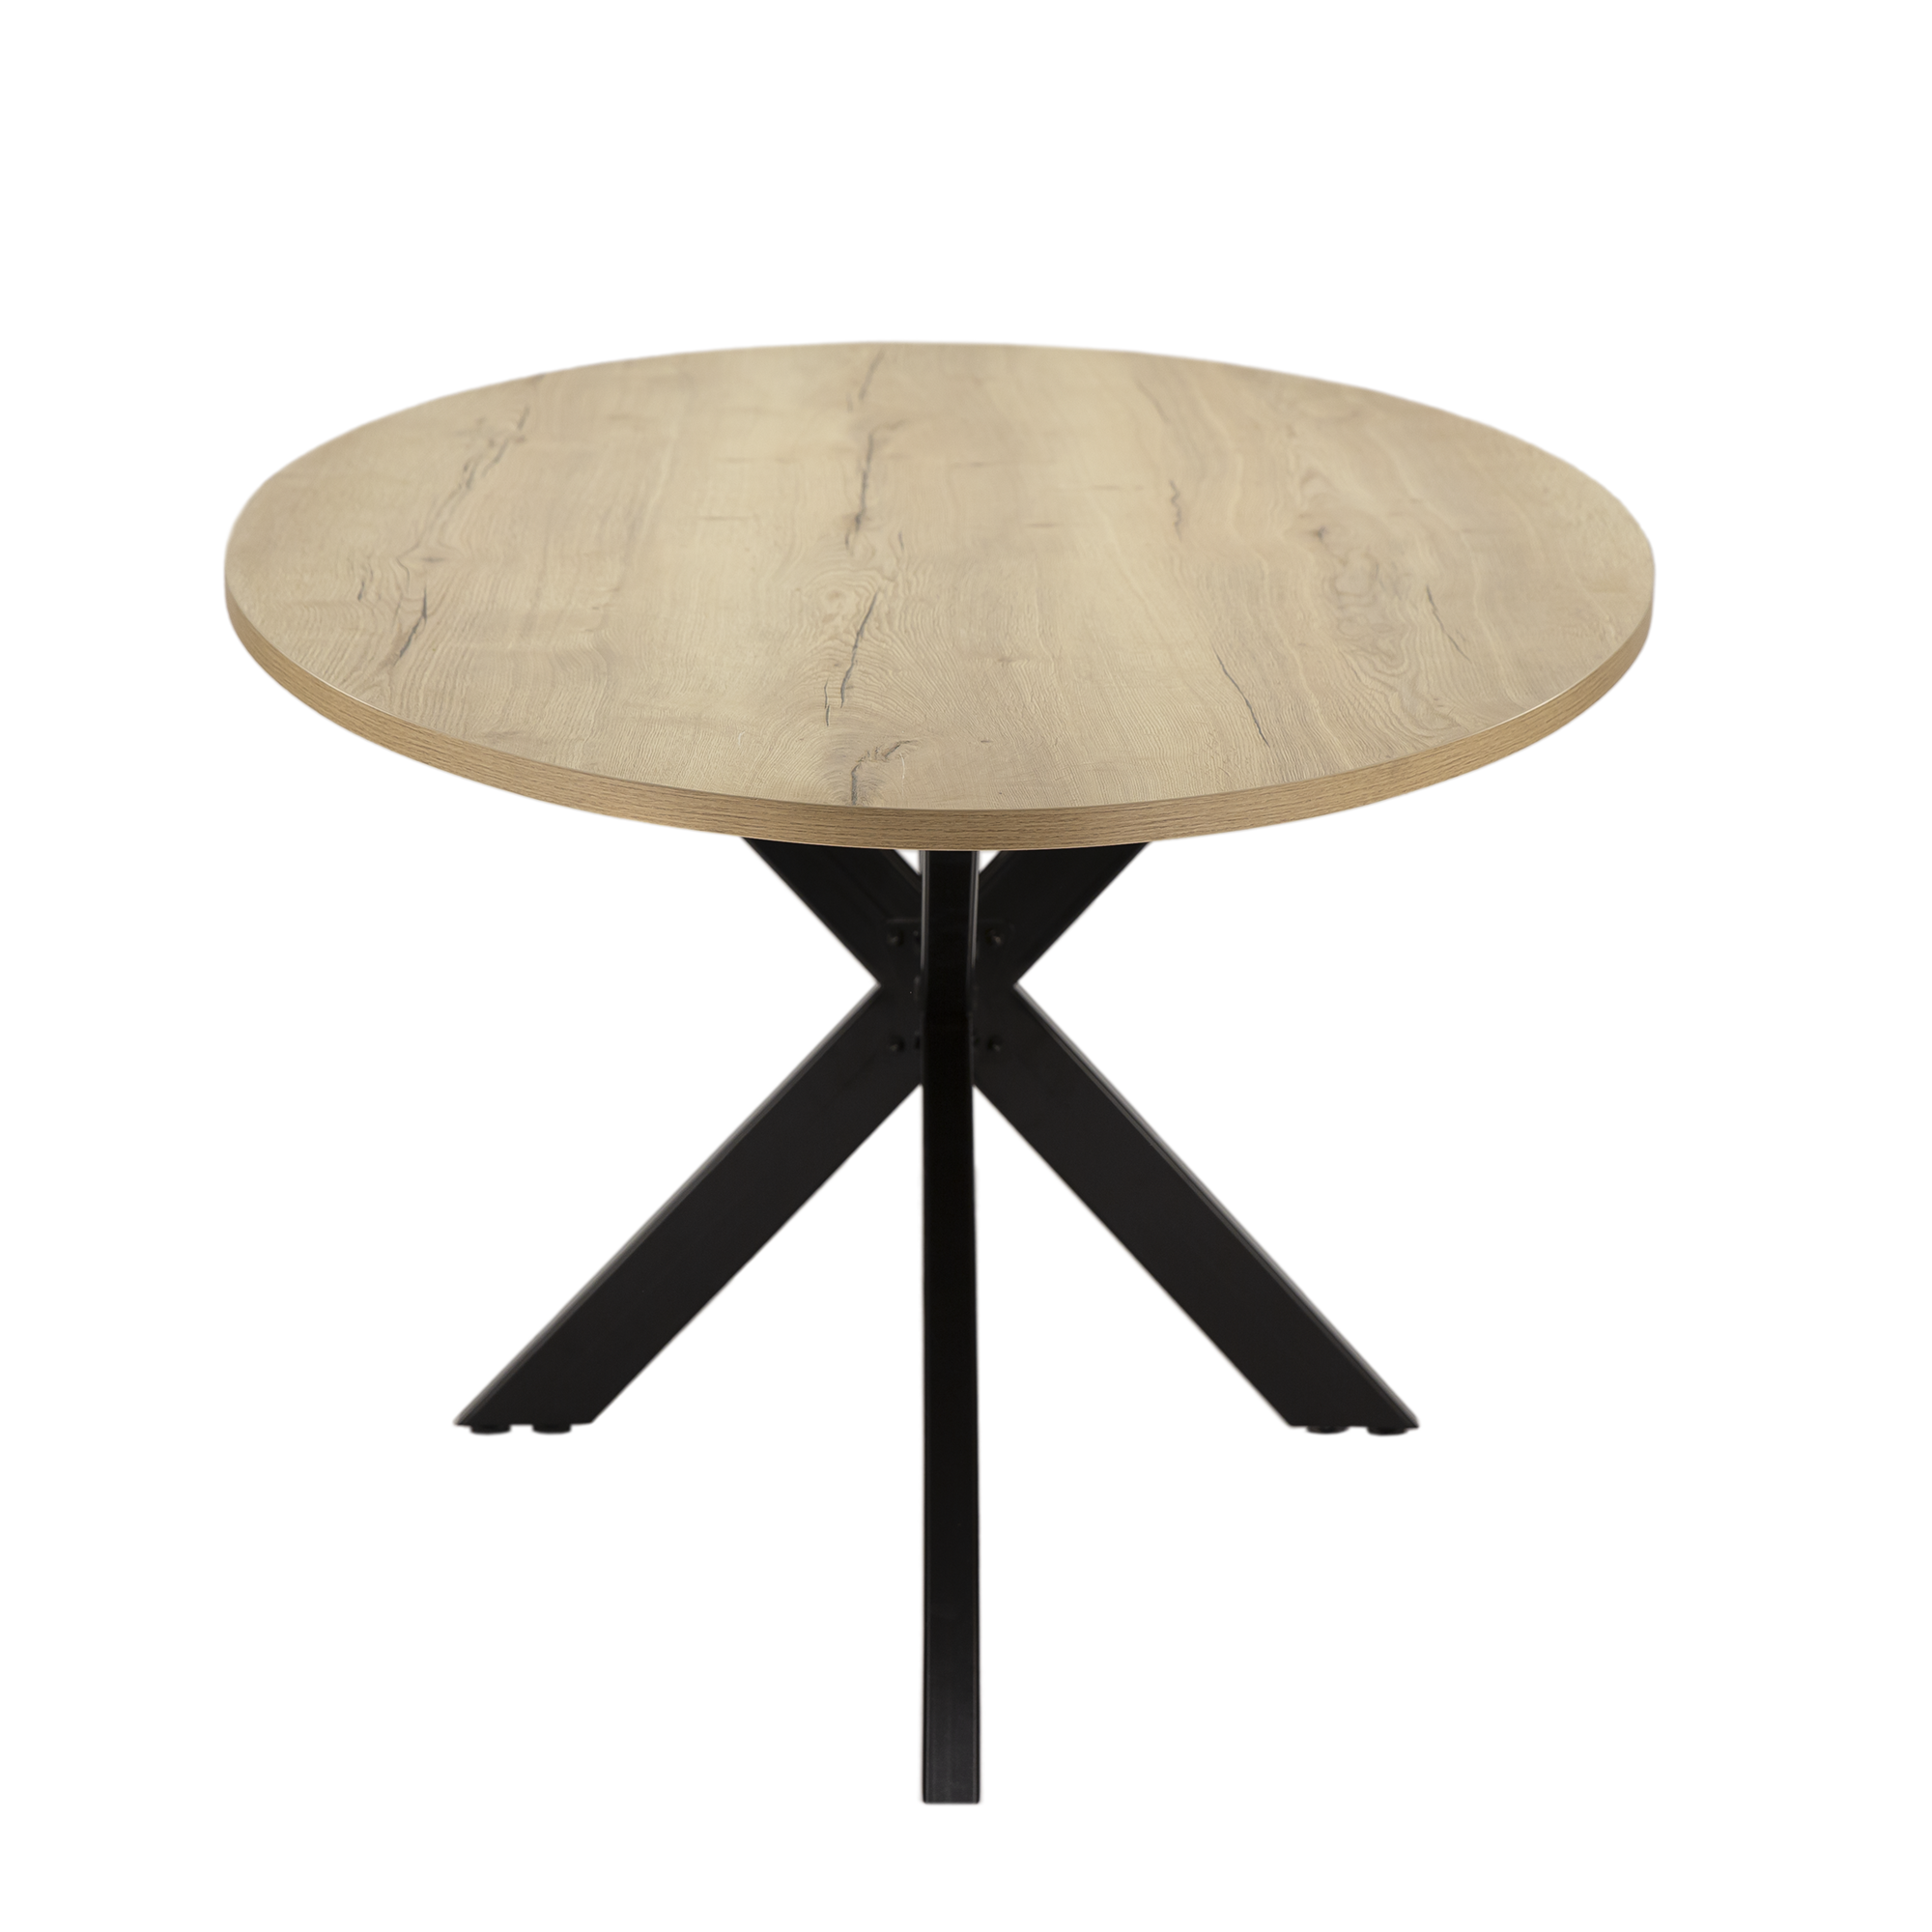 Ellipse conference table